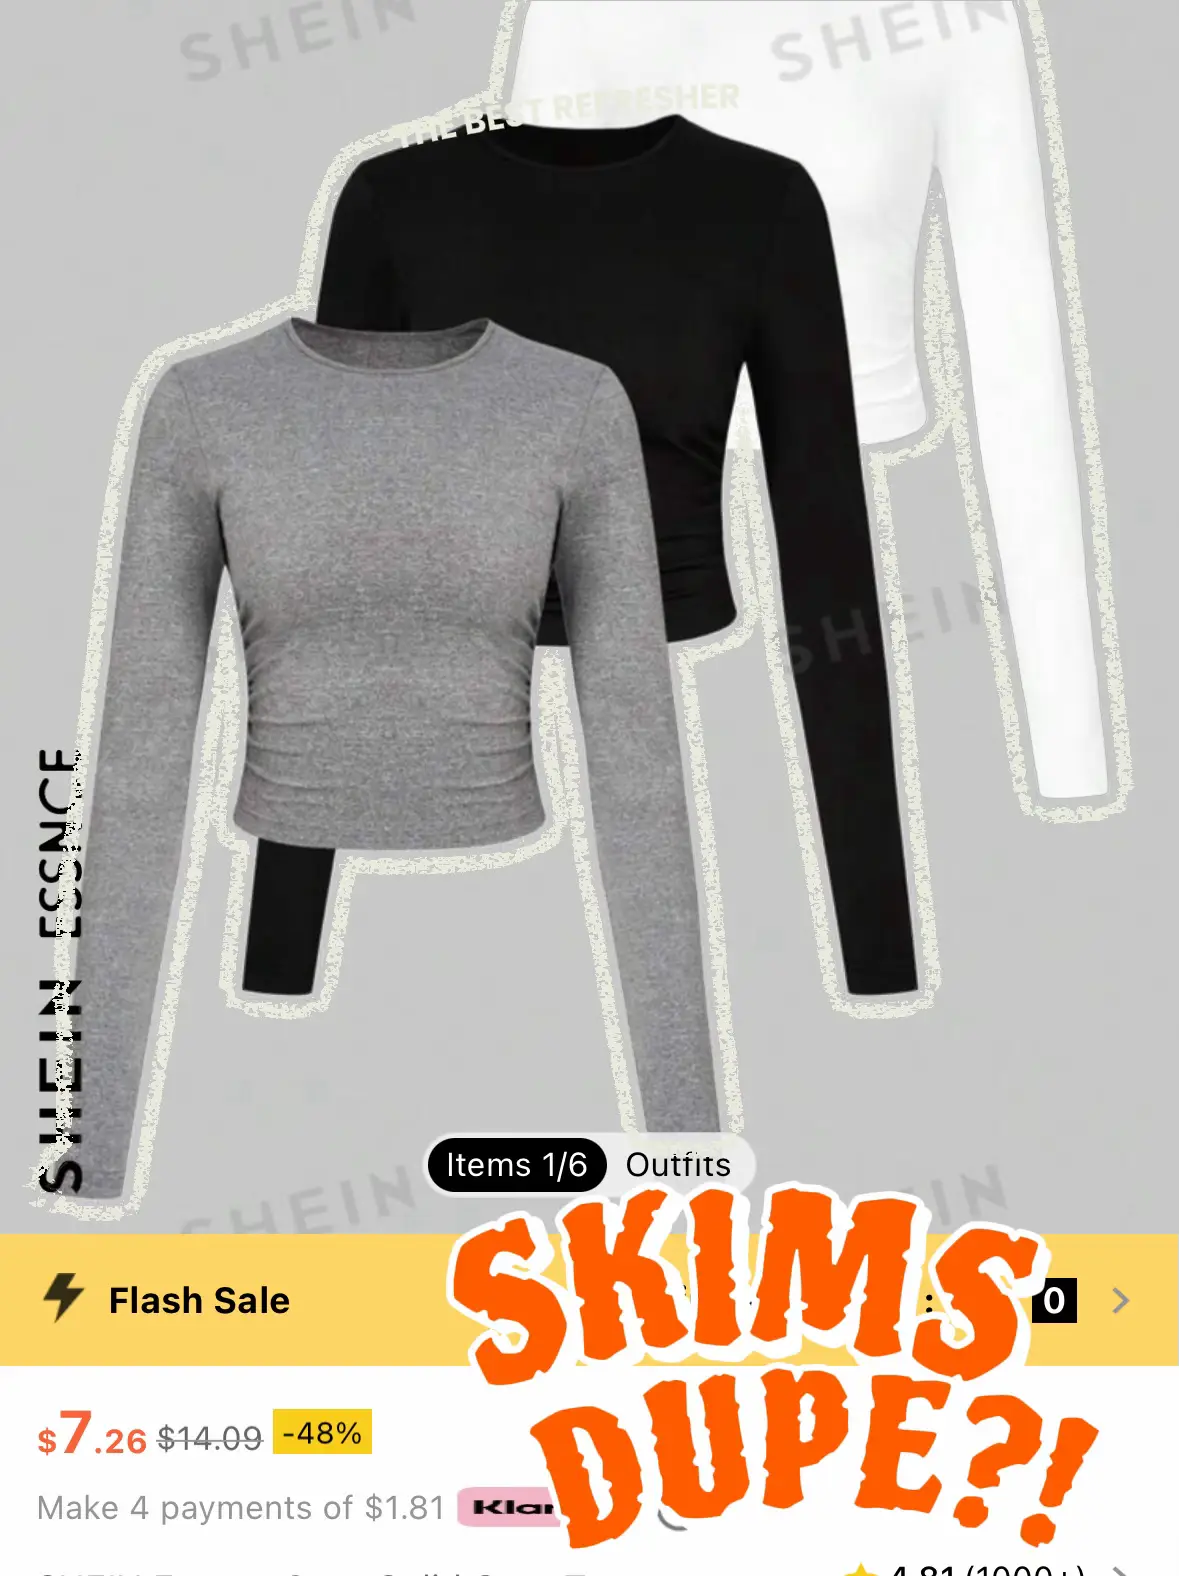 I got a SKIMS T-shirt dupe for just £8.99 - it's so flattering and actually  better quality